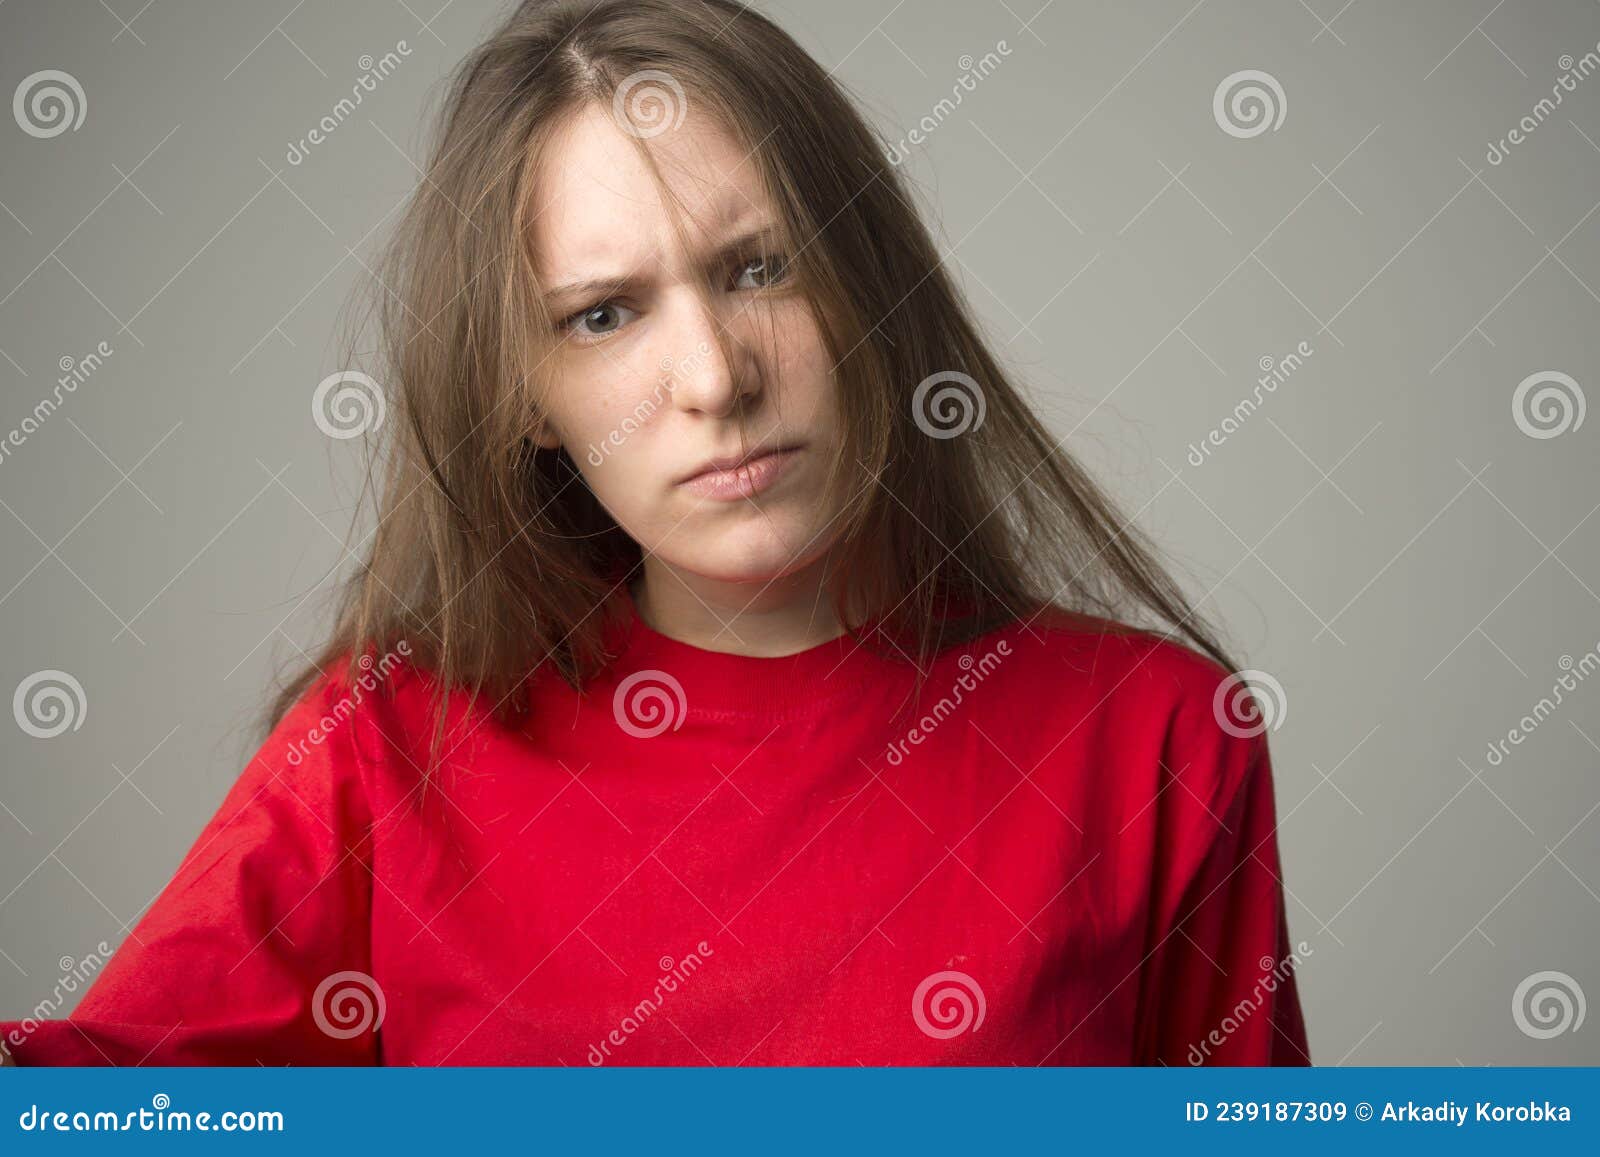 https://thumbs.dreamstime.com/z/anger-rage-concept-young-expressive-woman-show-her-bad-face-angry-nervous-annoyed-girl-portrait-human-full-negative-emot-239187309.jpg